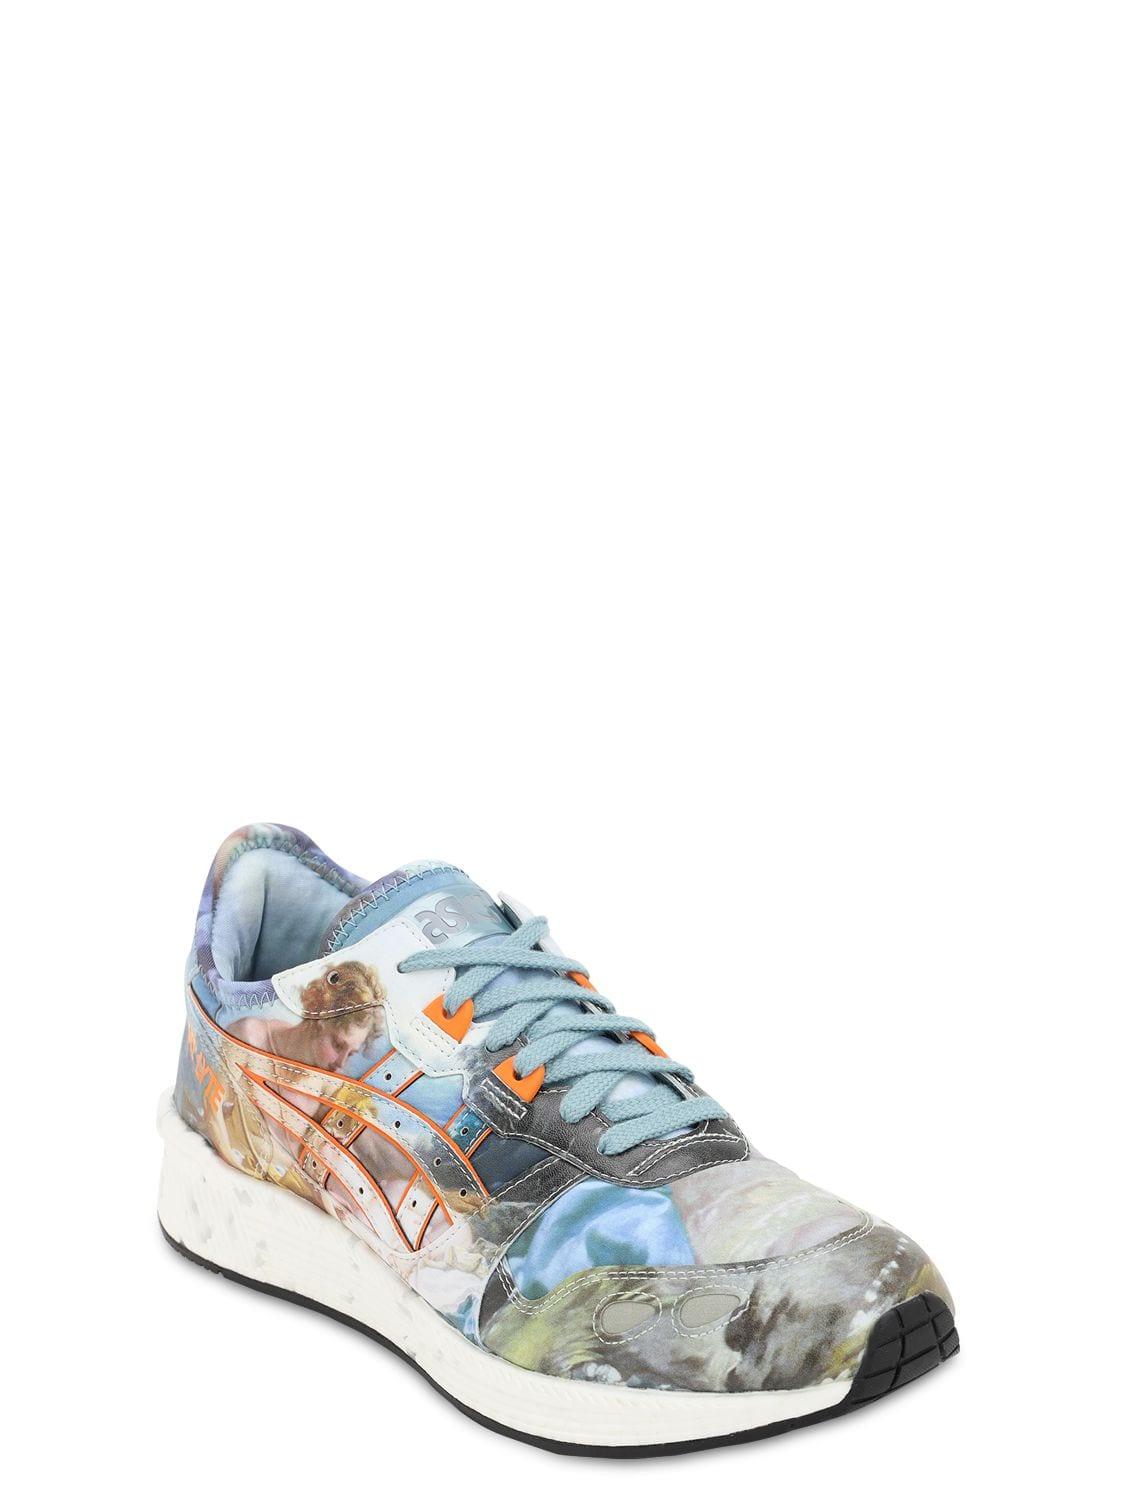 Asics Leather Vivienne Westwood Hypergel-lyte Sneakers in Blue for 